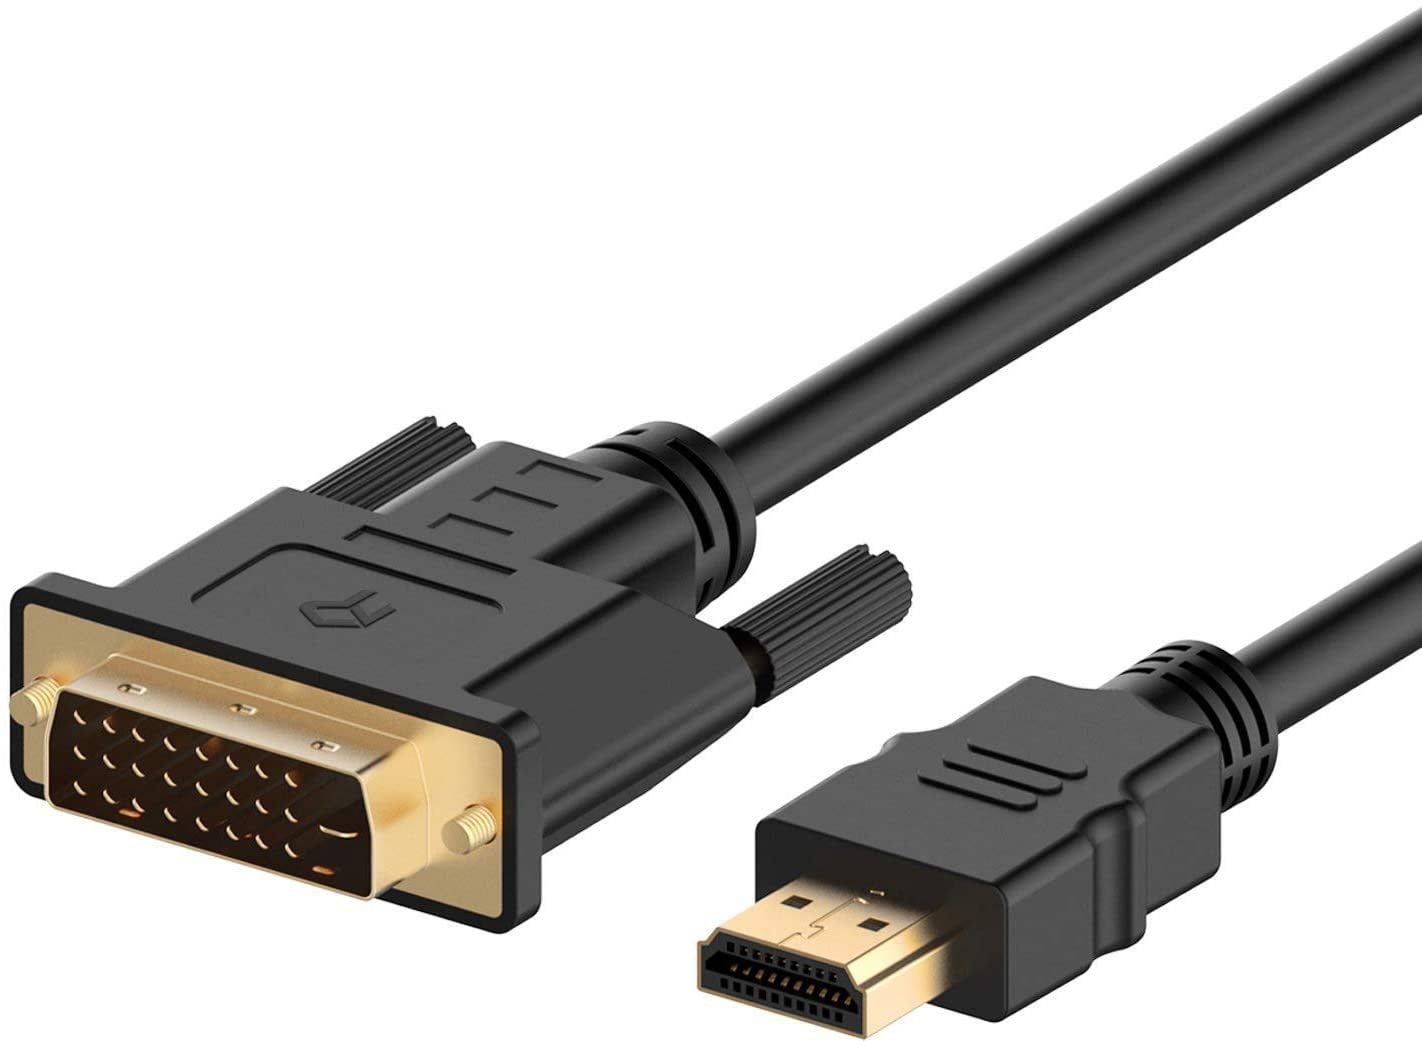  Buy HDMI to DVI Cable, RankieÂ CL3 Rated High Speed  Bi-Directional HDMI HDTV to DVI Cable 6ft Online at Low Prices in India